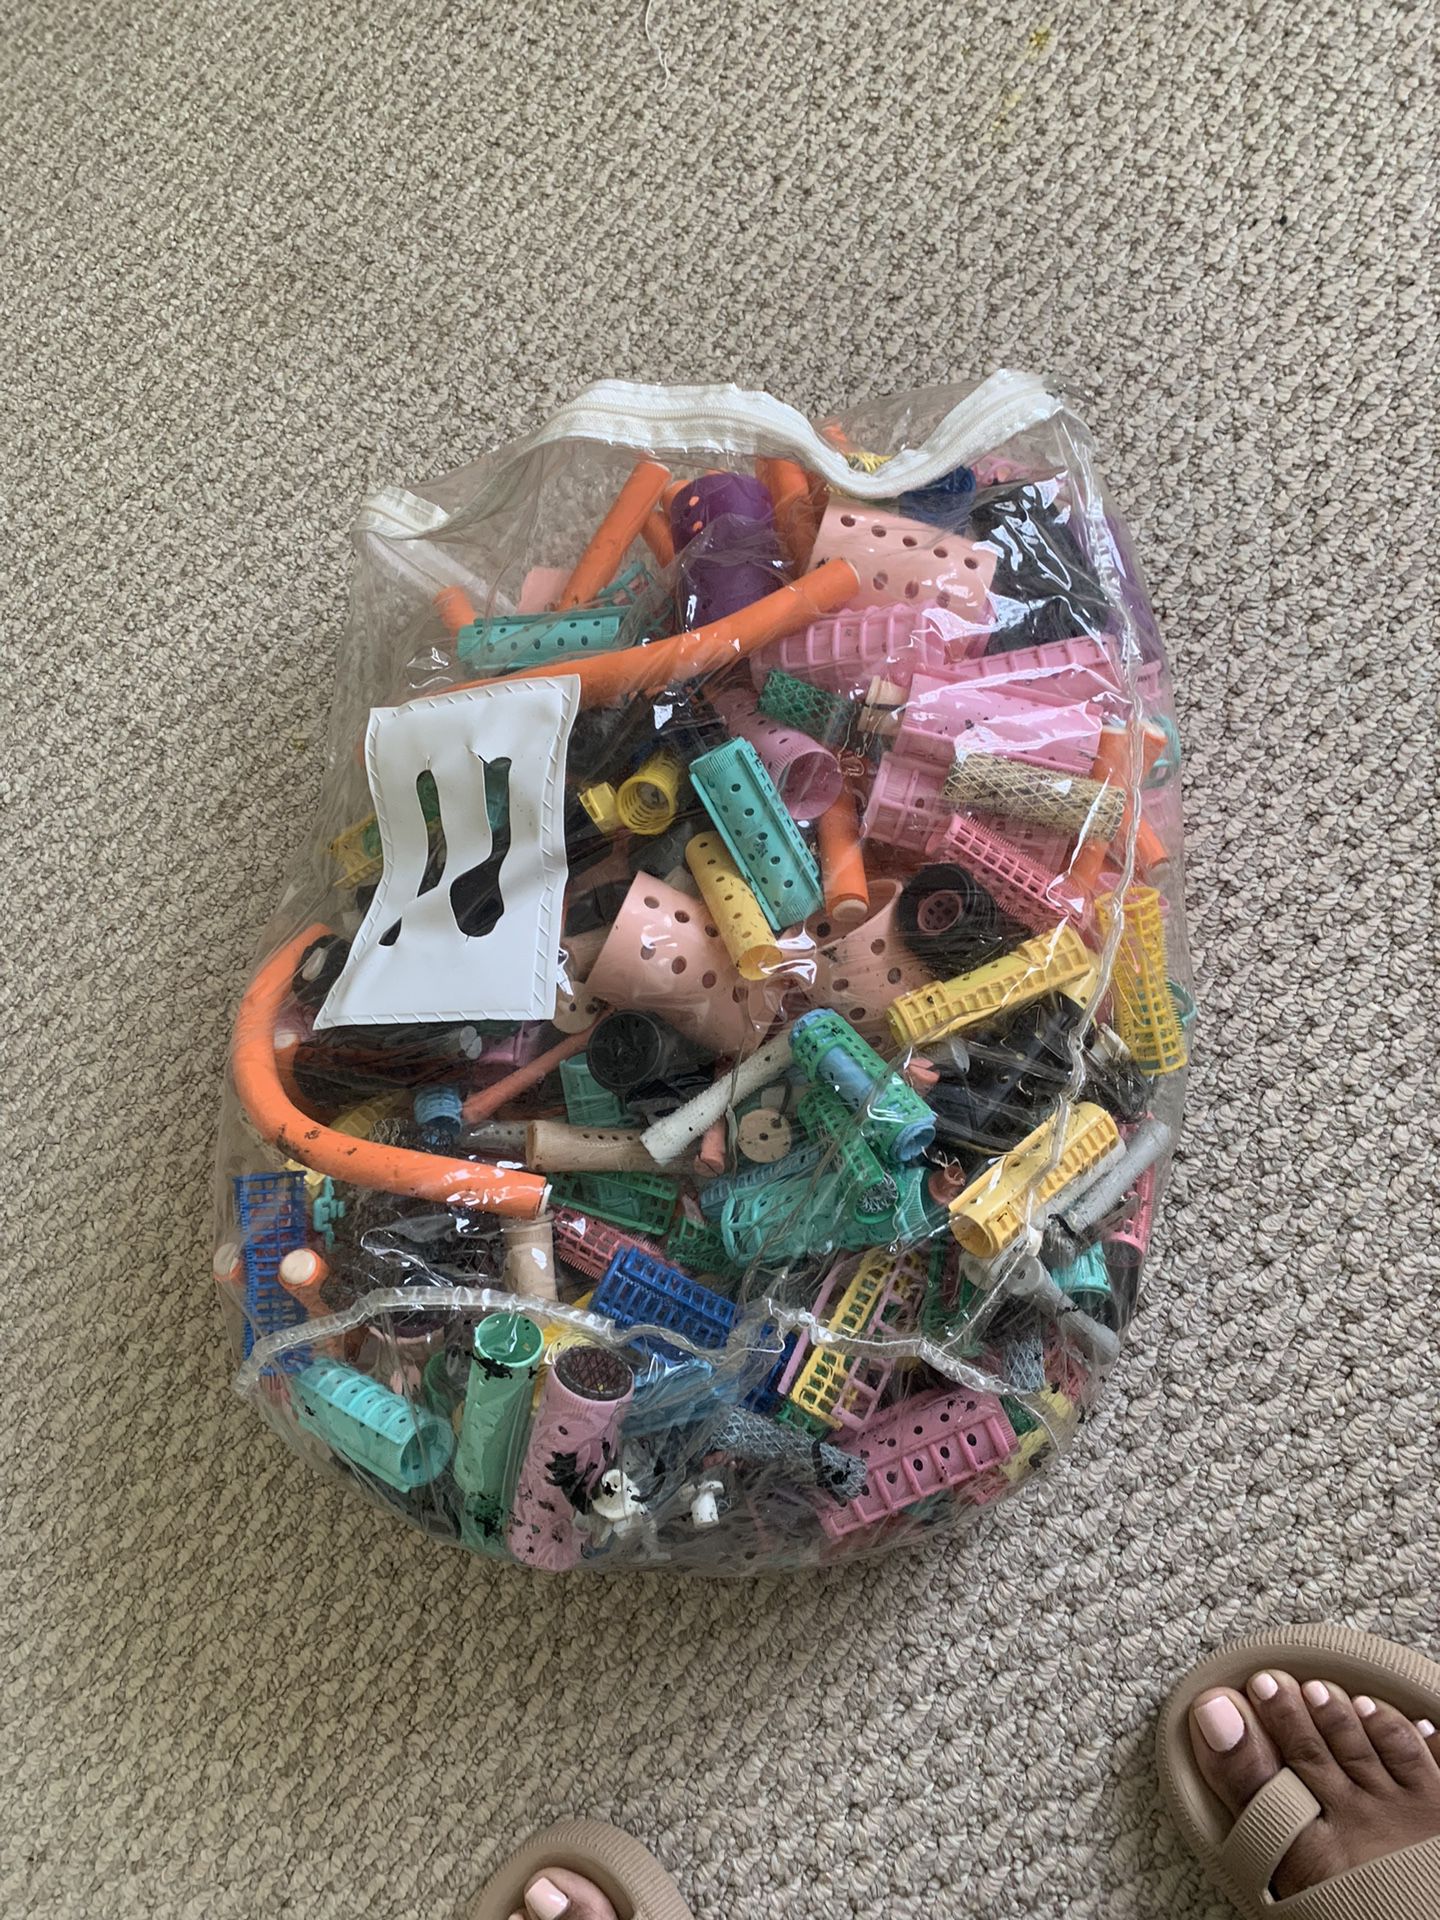 Bag of Used Rollers And Curlers